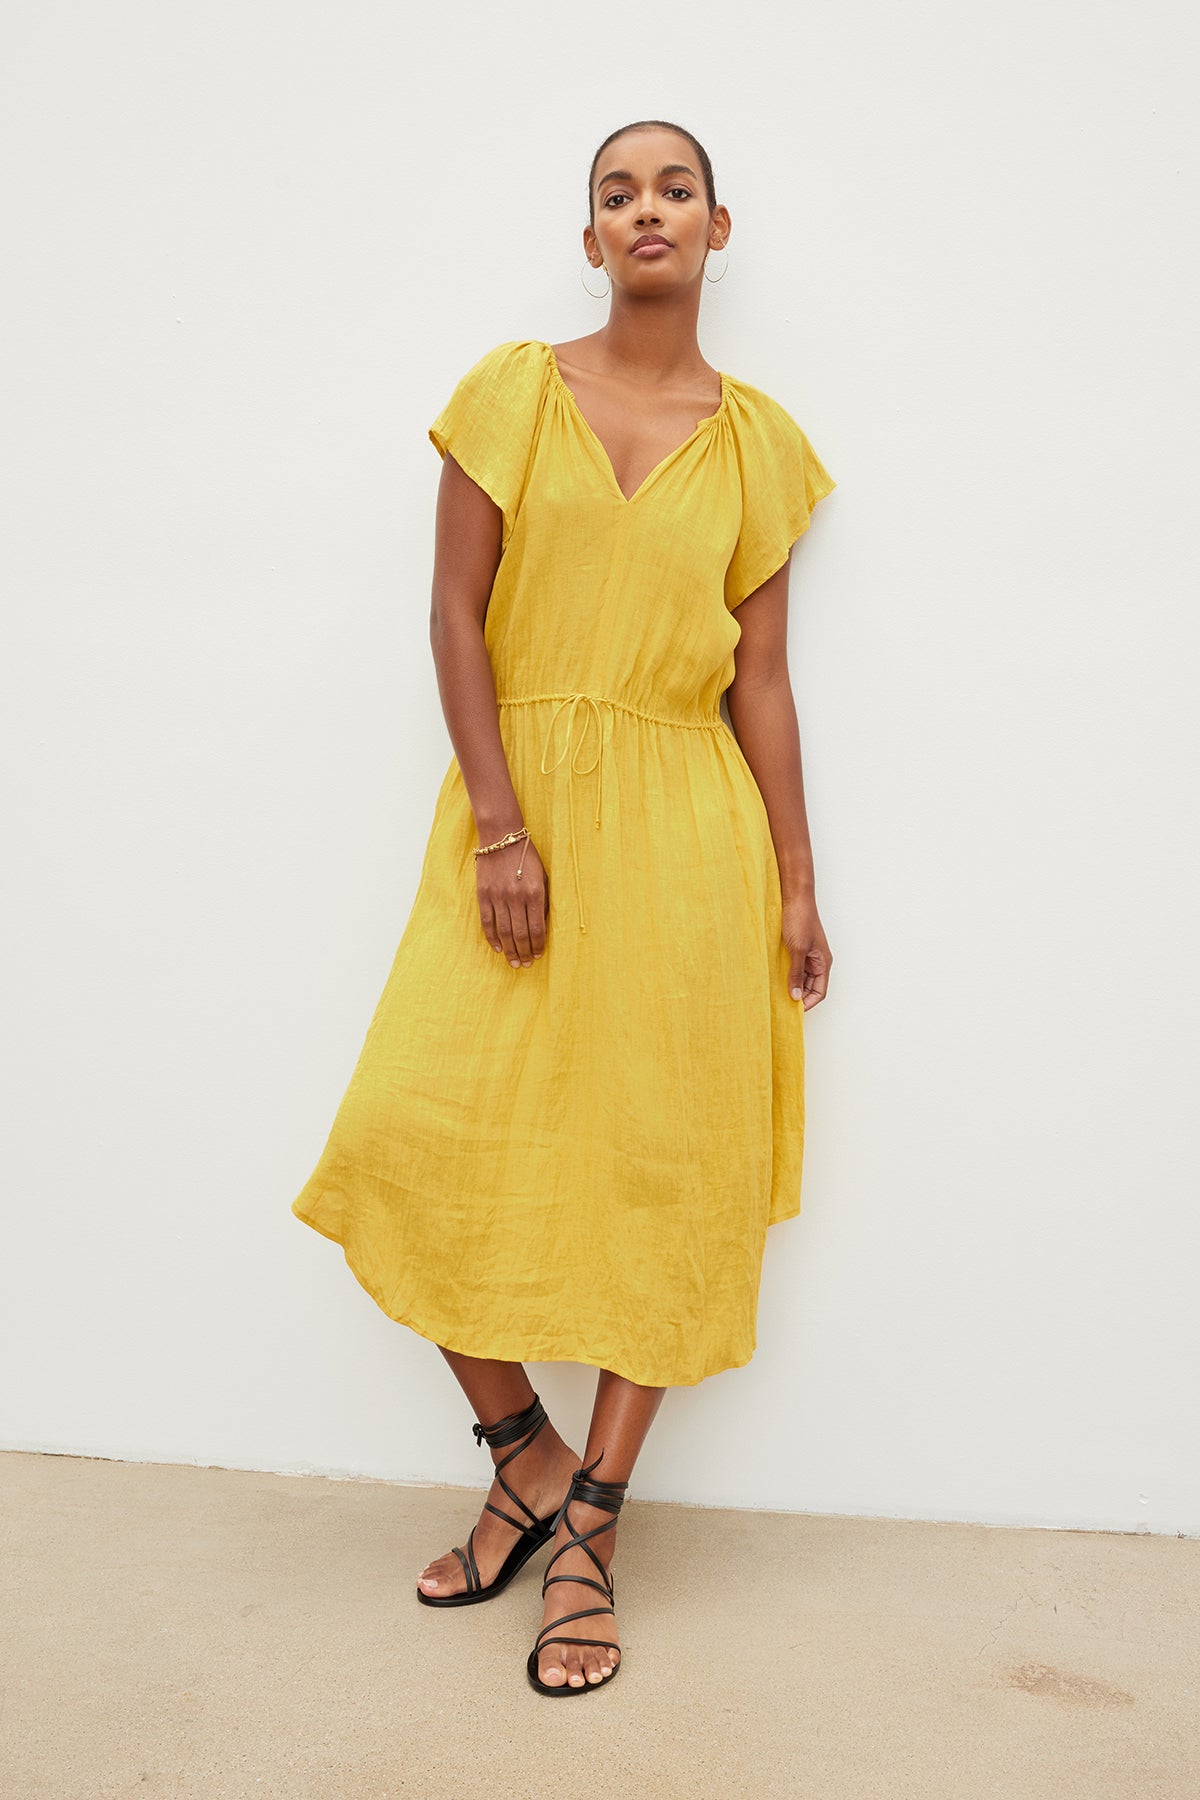 Woman in a yellow PEPPER LINEN V-NECK DRESS by Velvet by Graham & Spencer with a drawstring waist and black sandals stands against a white wall, looking directly at the camera.-36691485720769